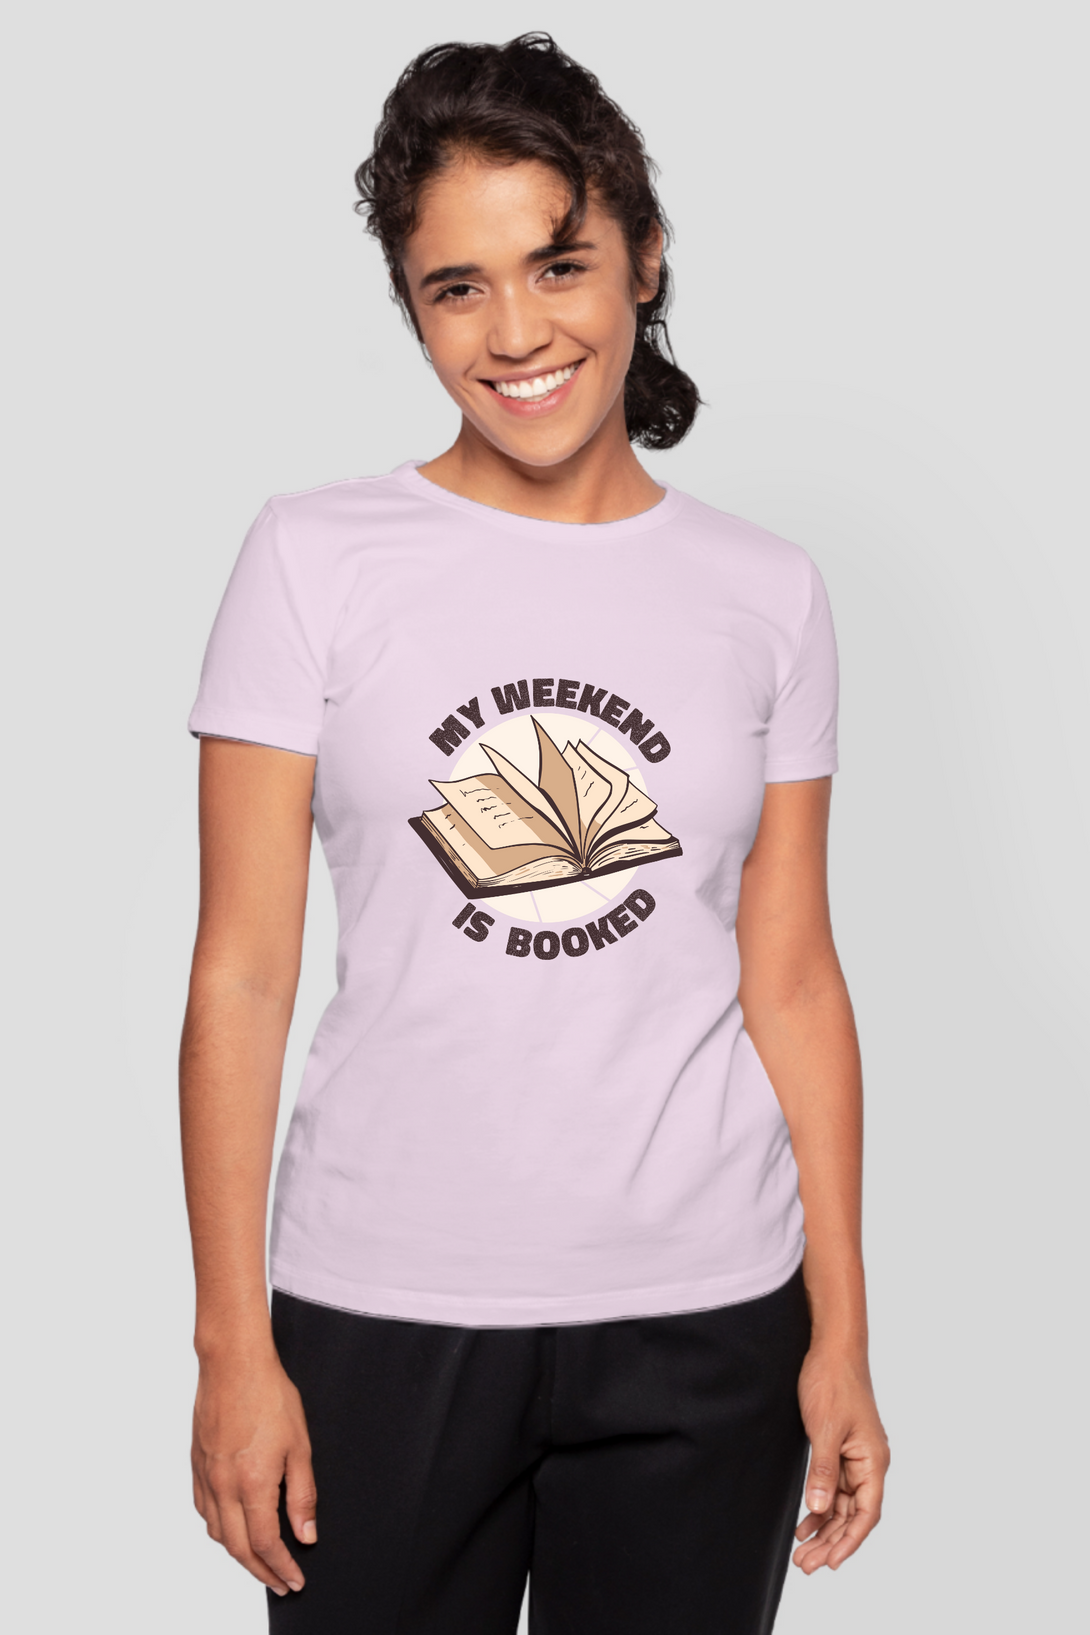 My Weekend Is Booked Printed T-Shirt For Women - WowWaves - 10